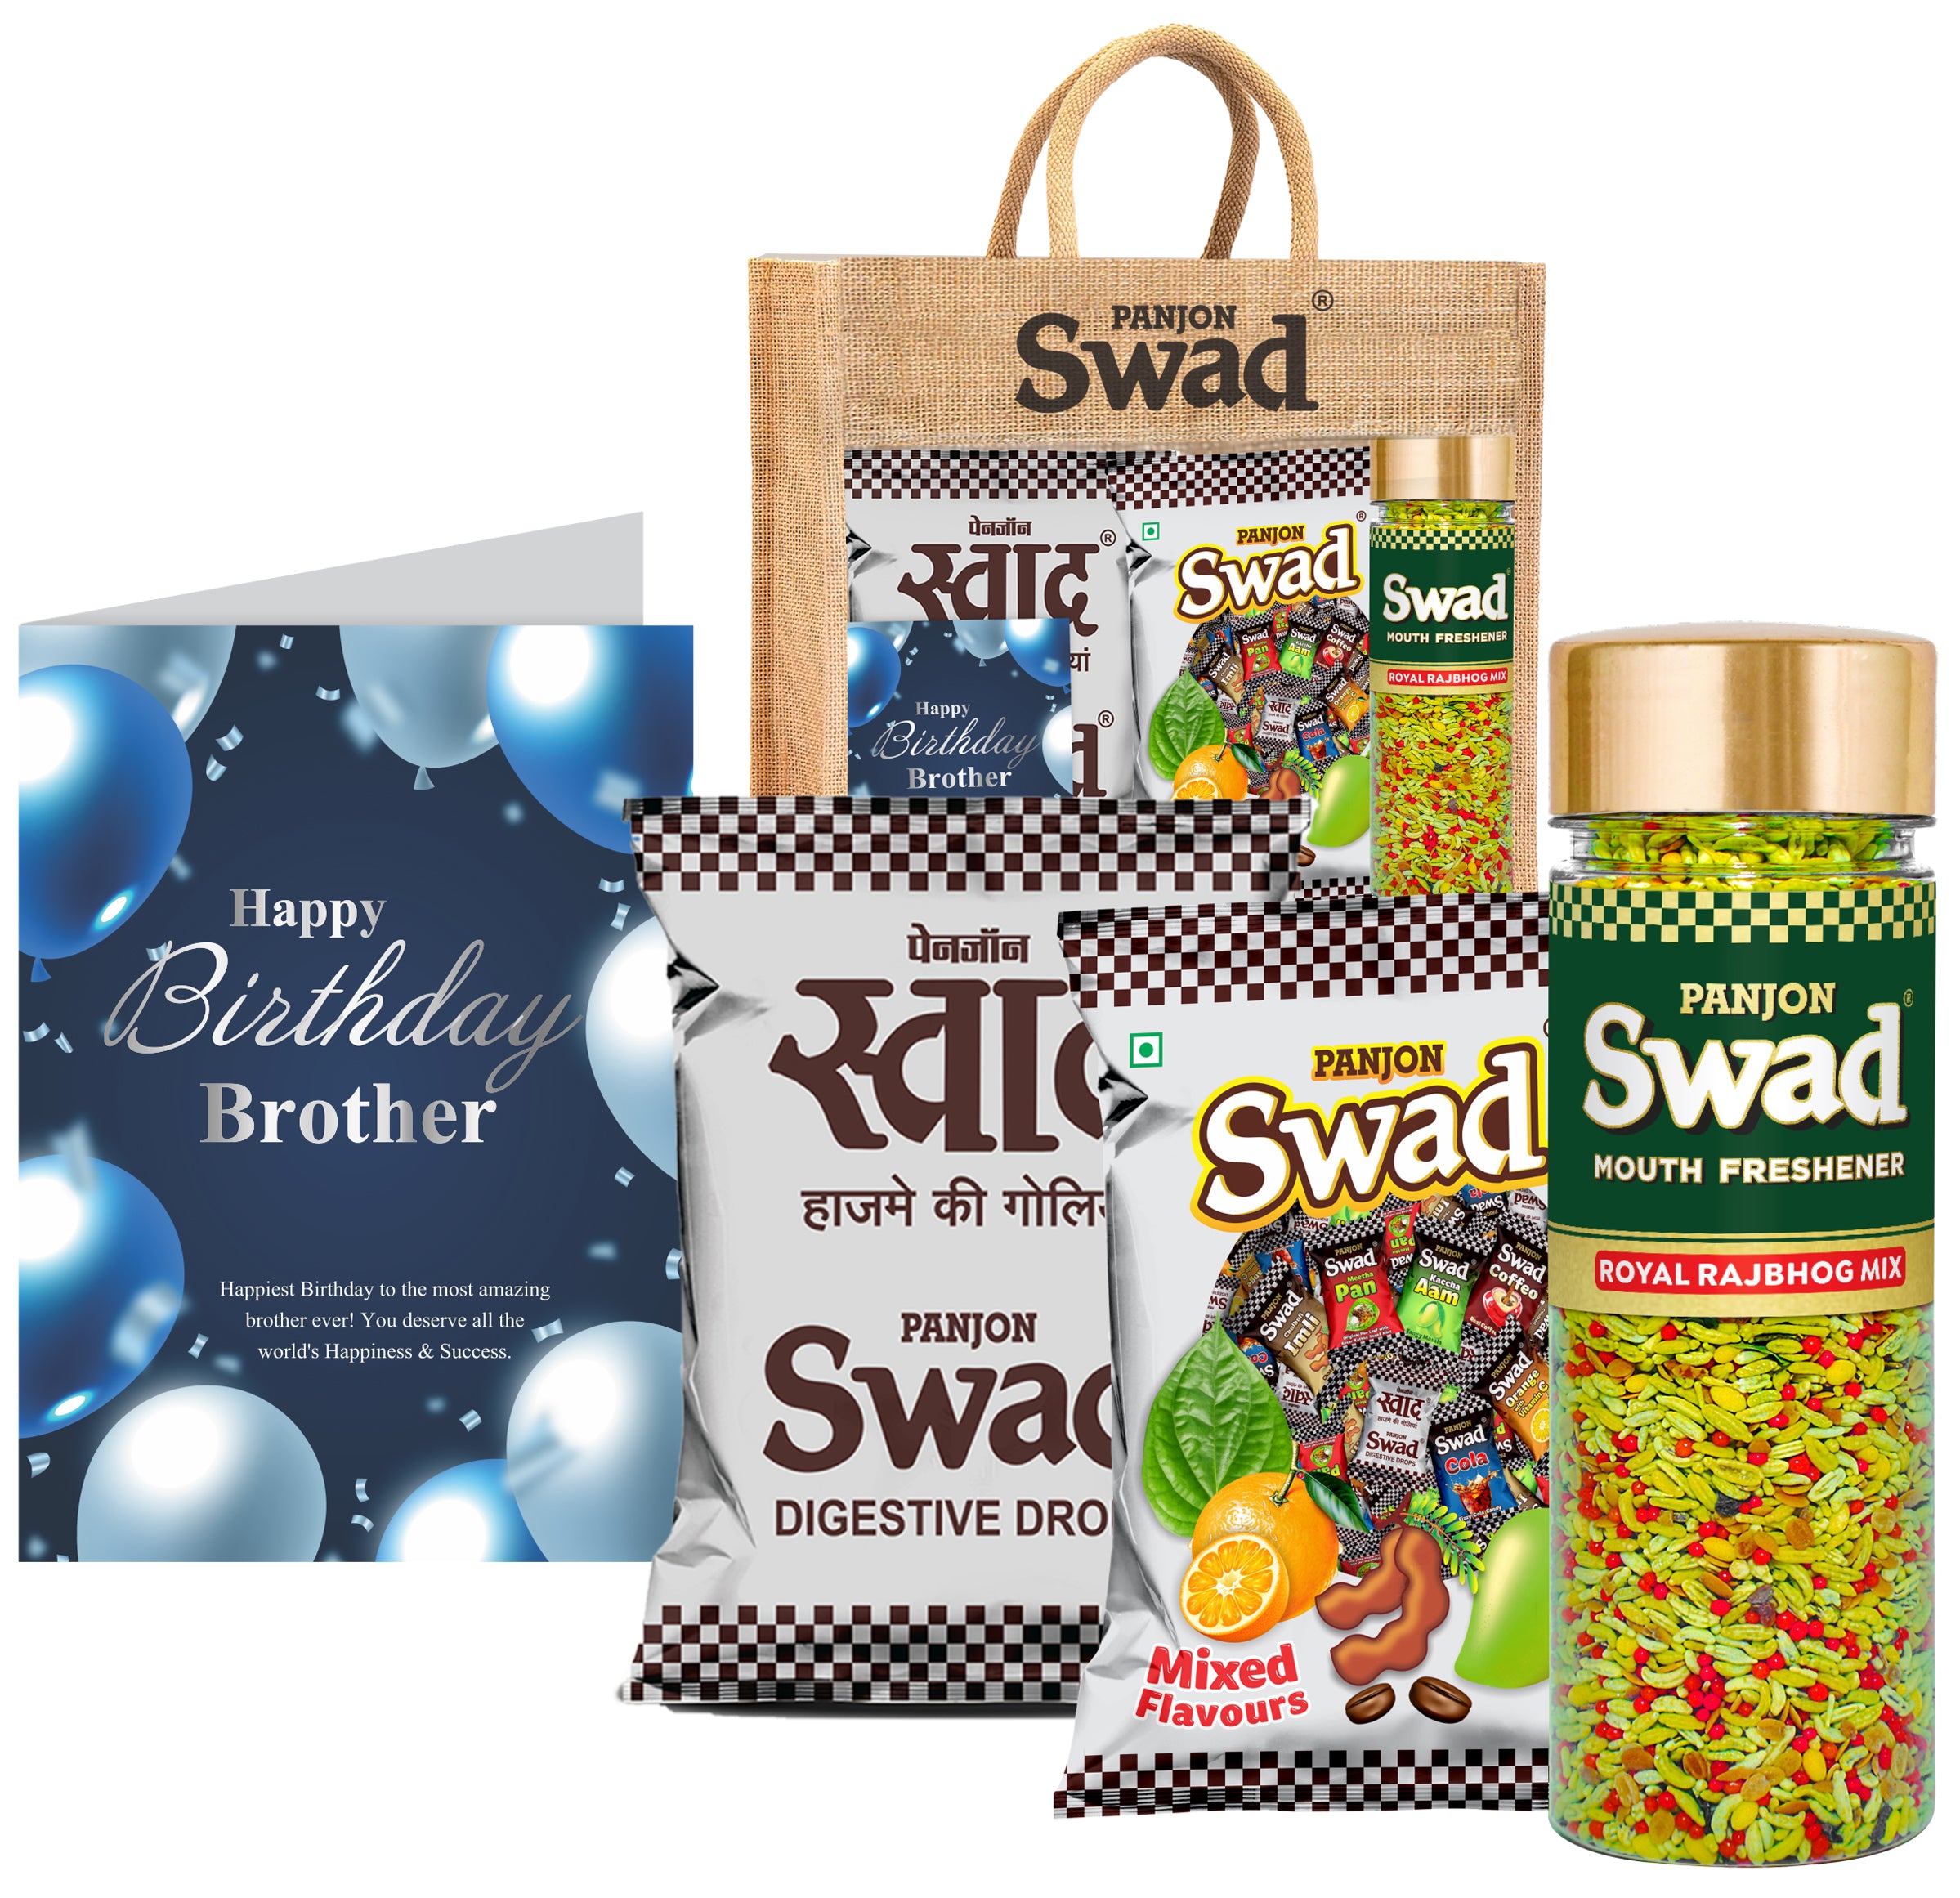 Swad Happy Birthday Brother Bhaiya Gift with Card (25 Swad Candy, 25 Mixed Toffee, Rajbhog Mix Mukhwas) in Jute Bag